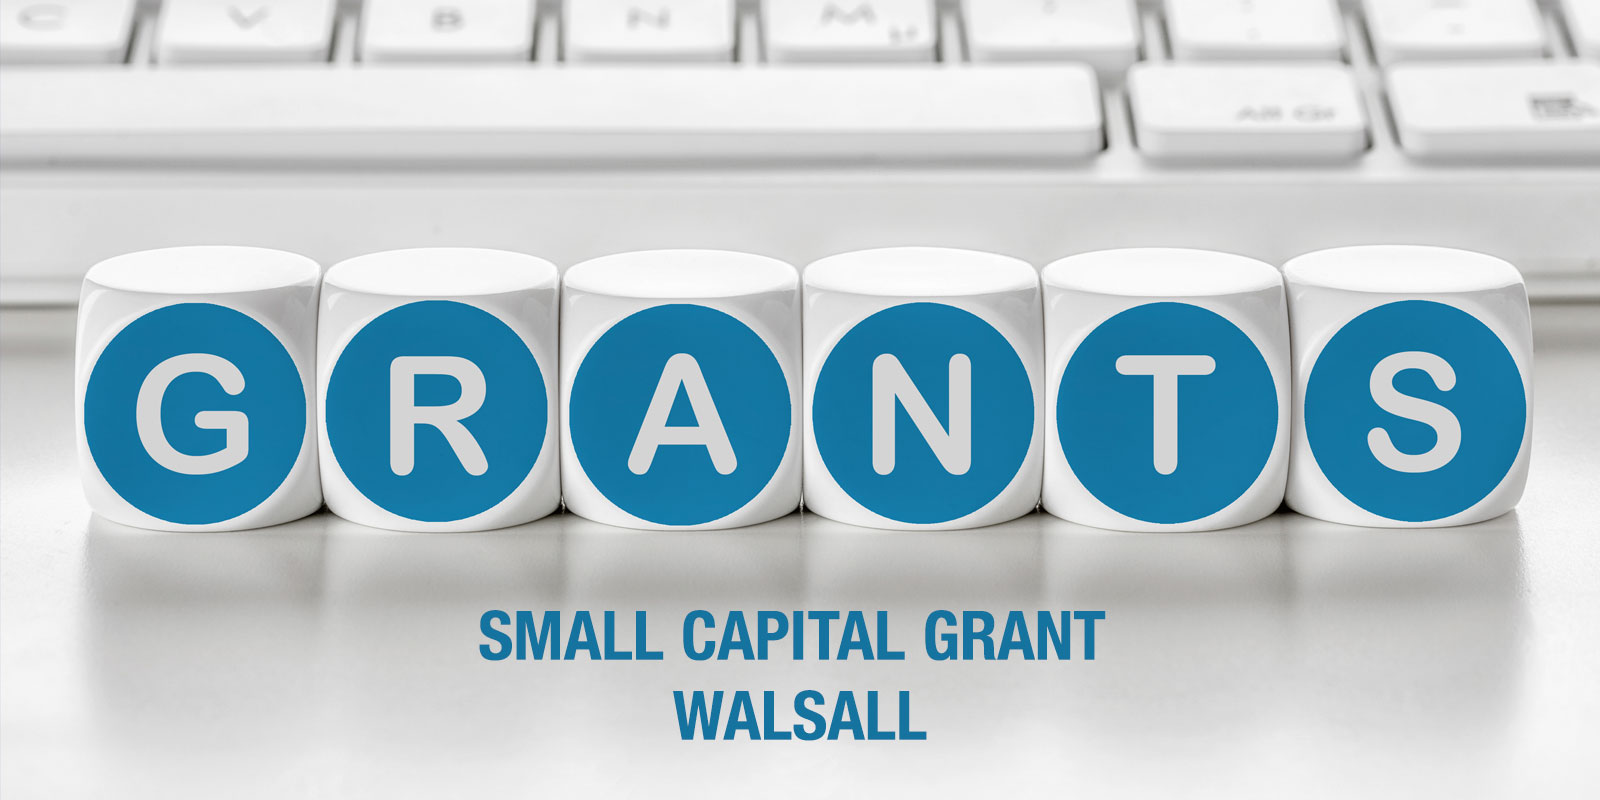 Small Capital Grant - Walsall